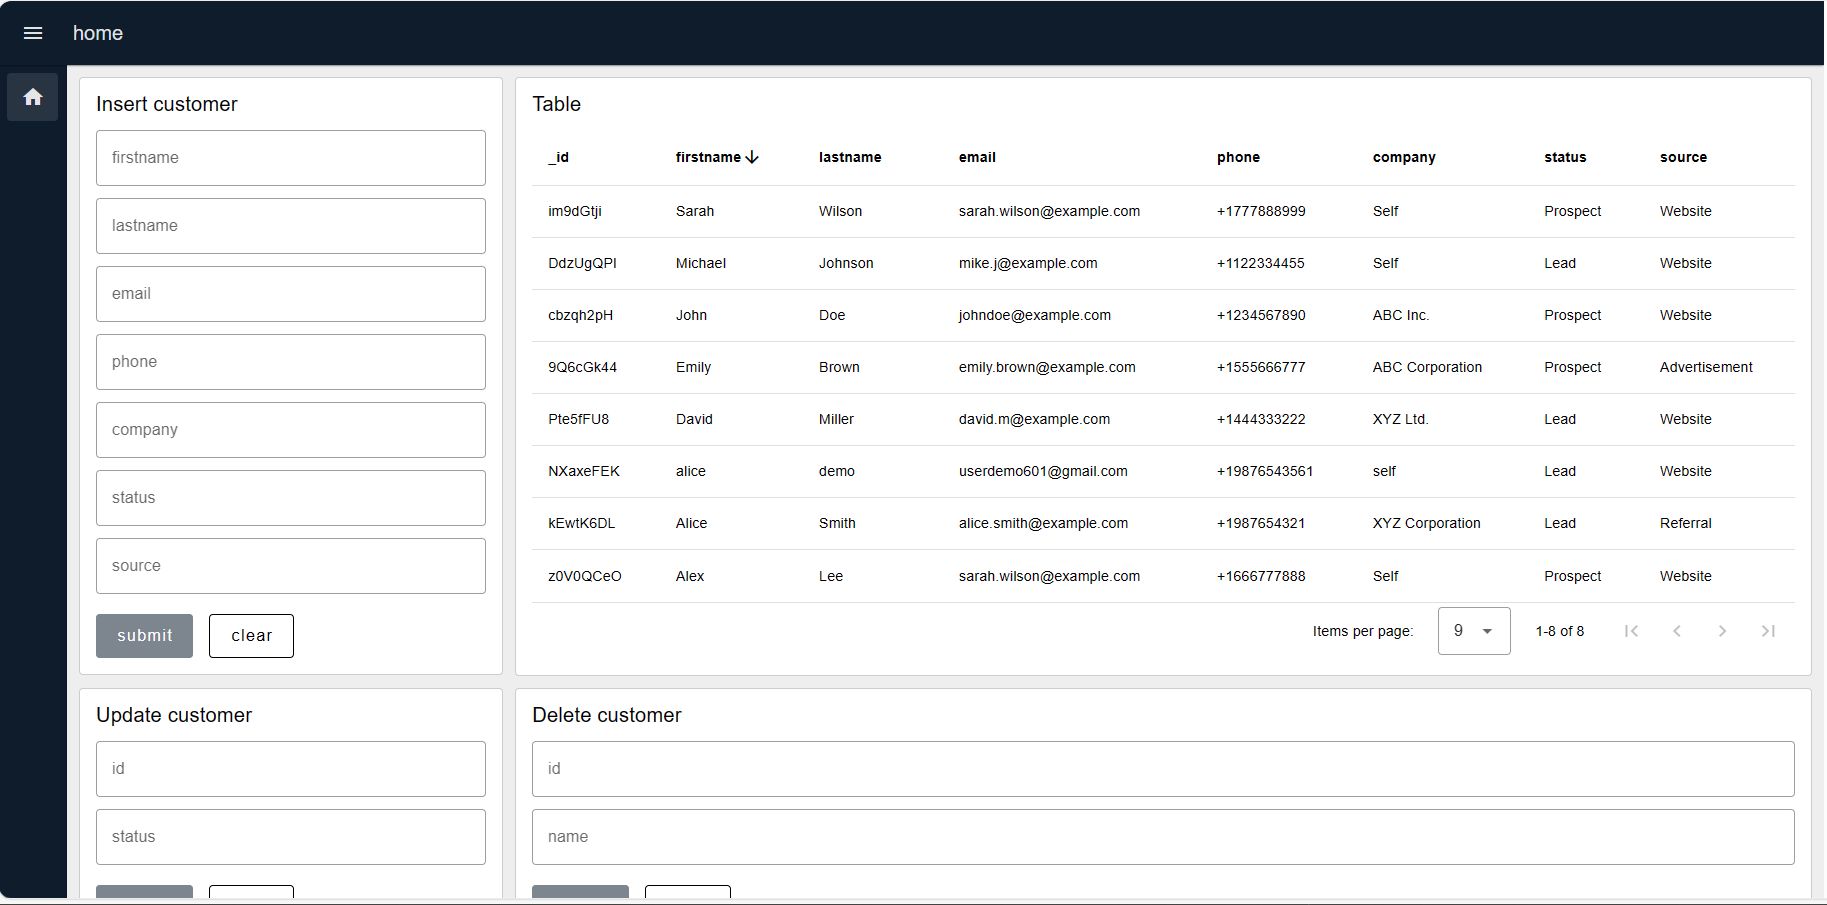 "Screenshot displaying dashboard view of CRM System"